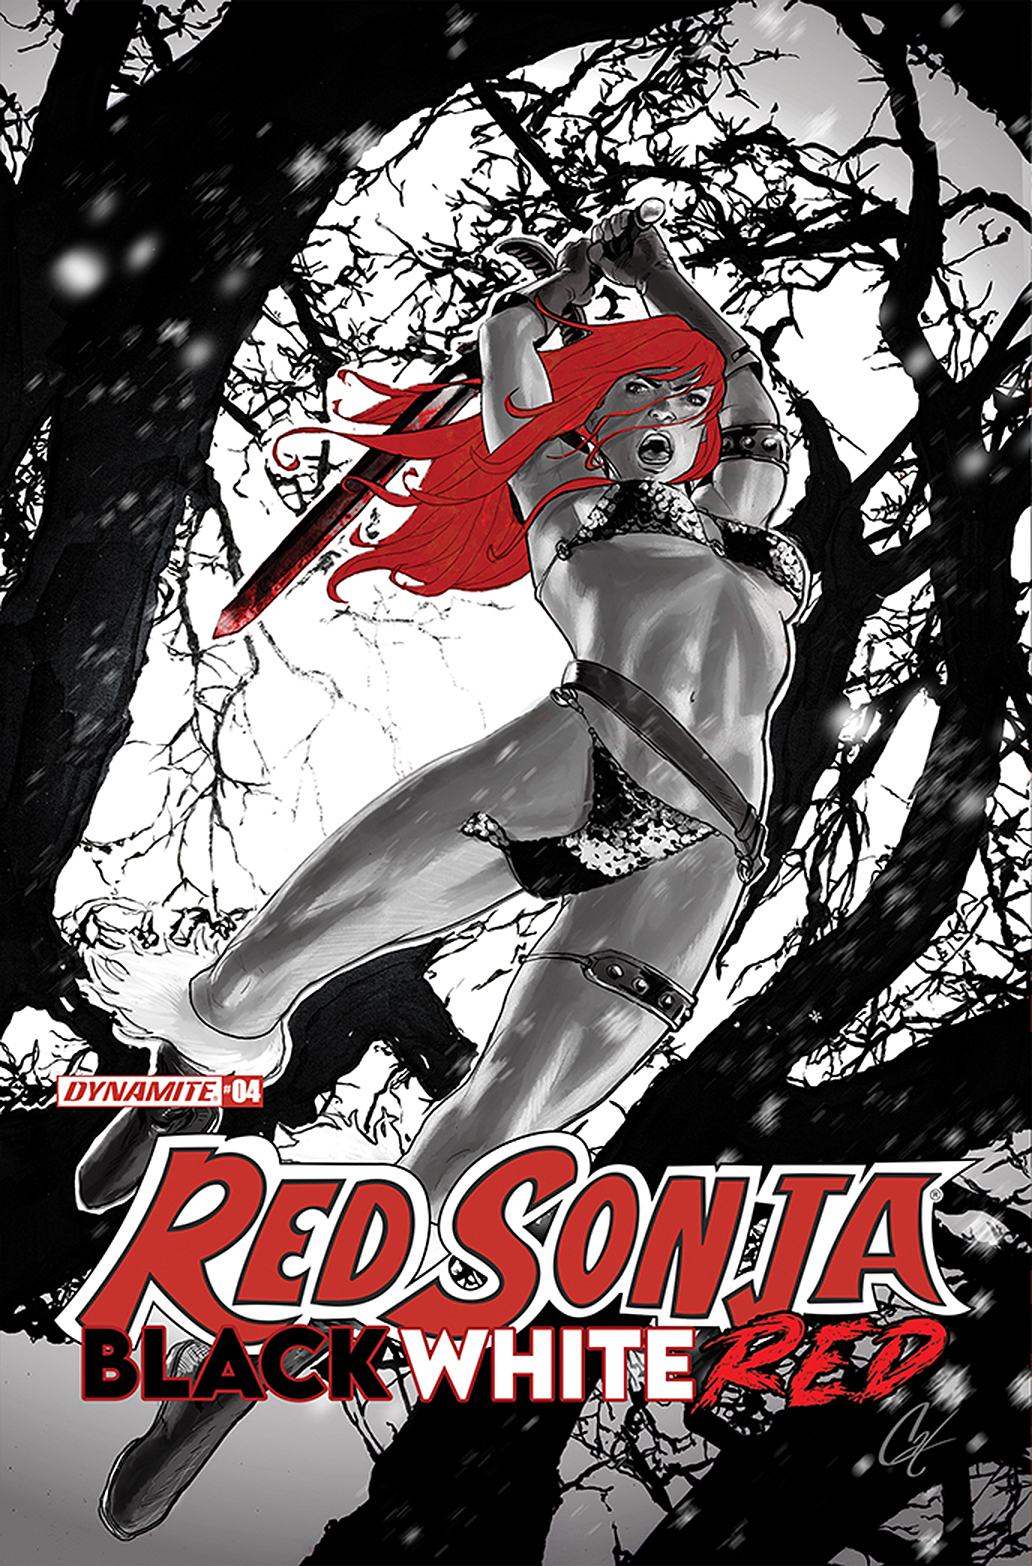 Red Sonja Black White Red #4 Cover B Staggs